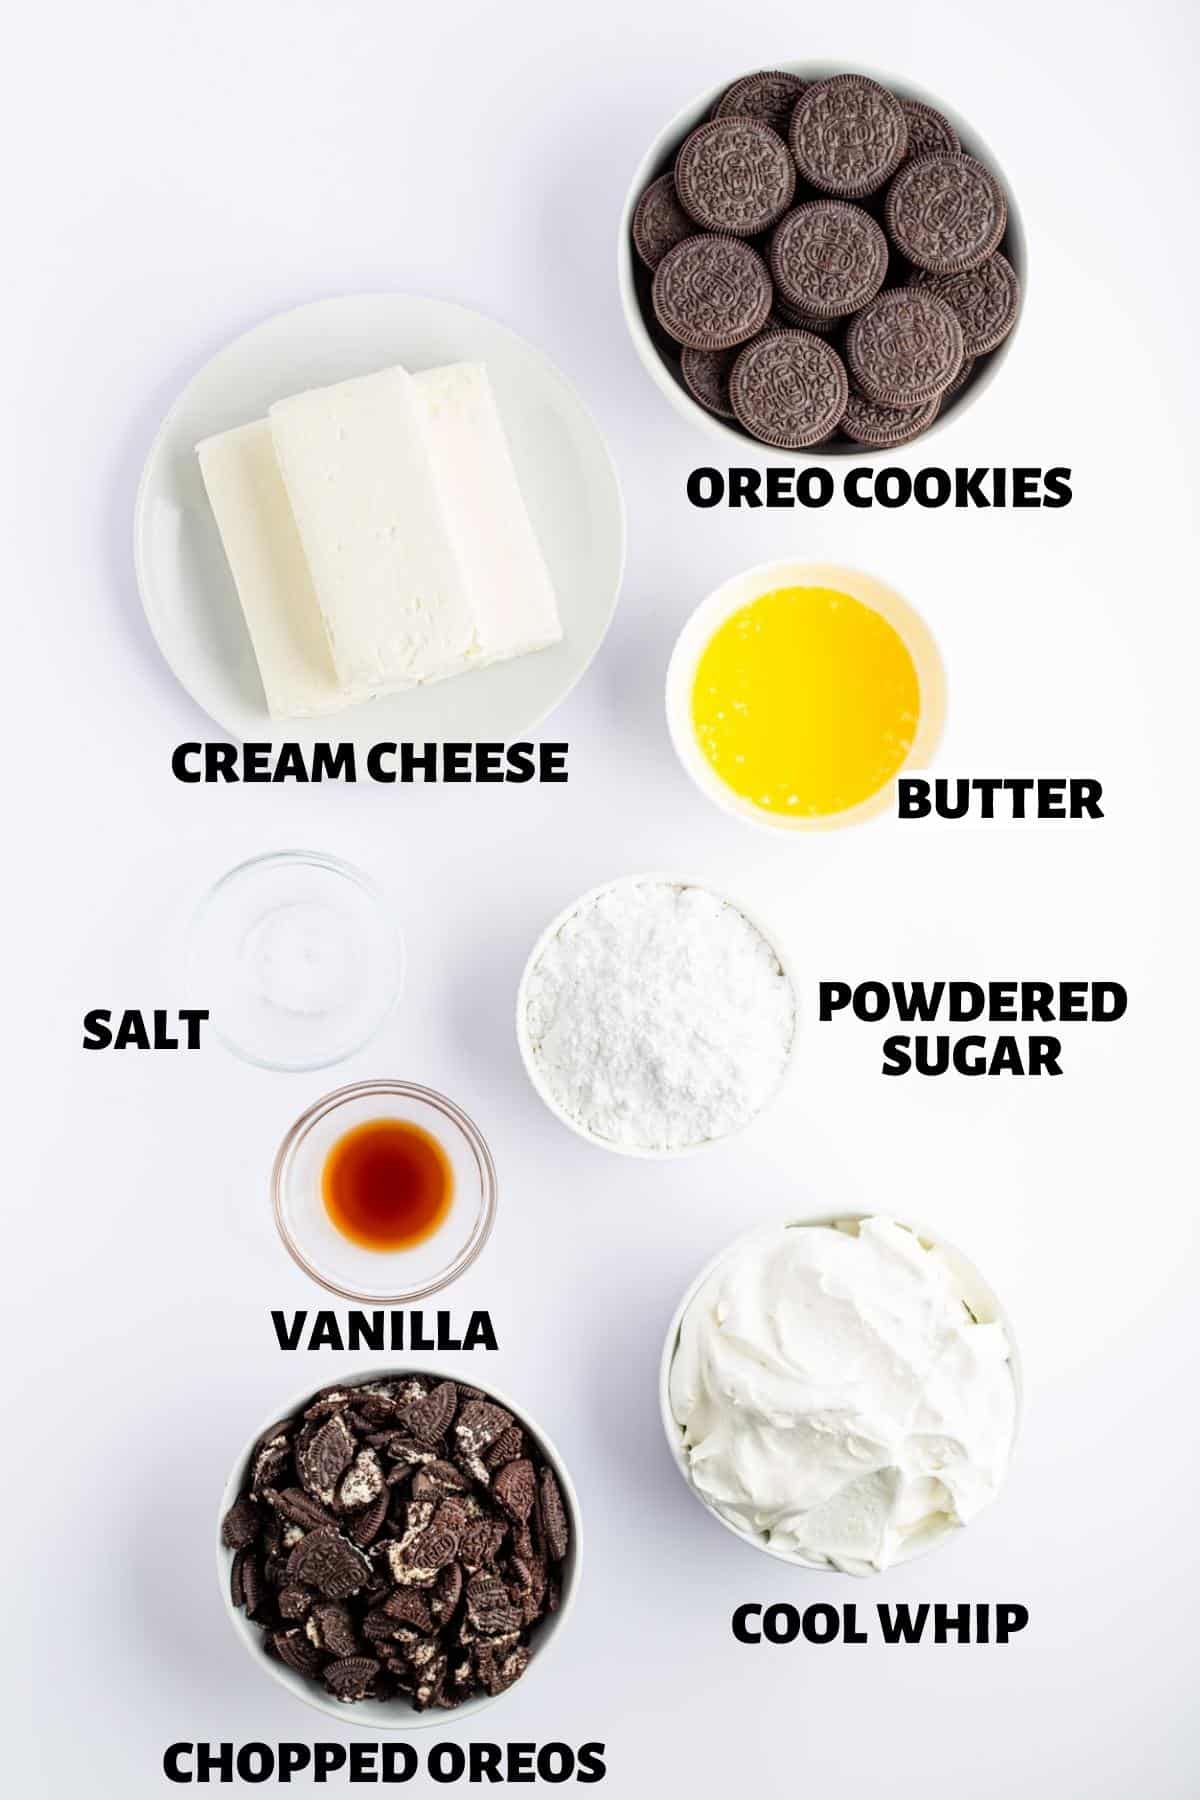 Labeled image of ingredients needed to make no bake Oreo Cheesecake.